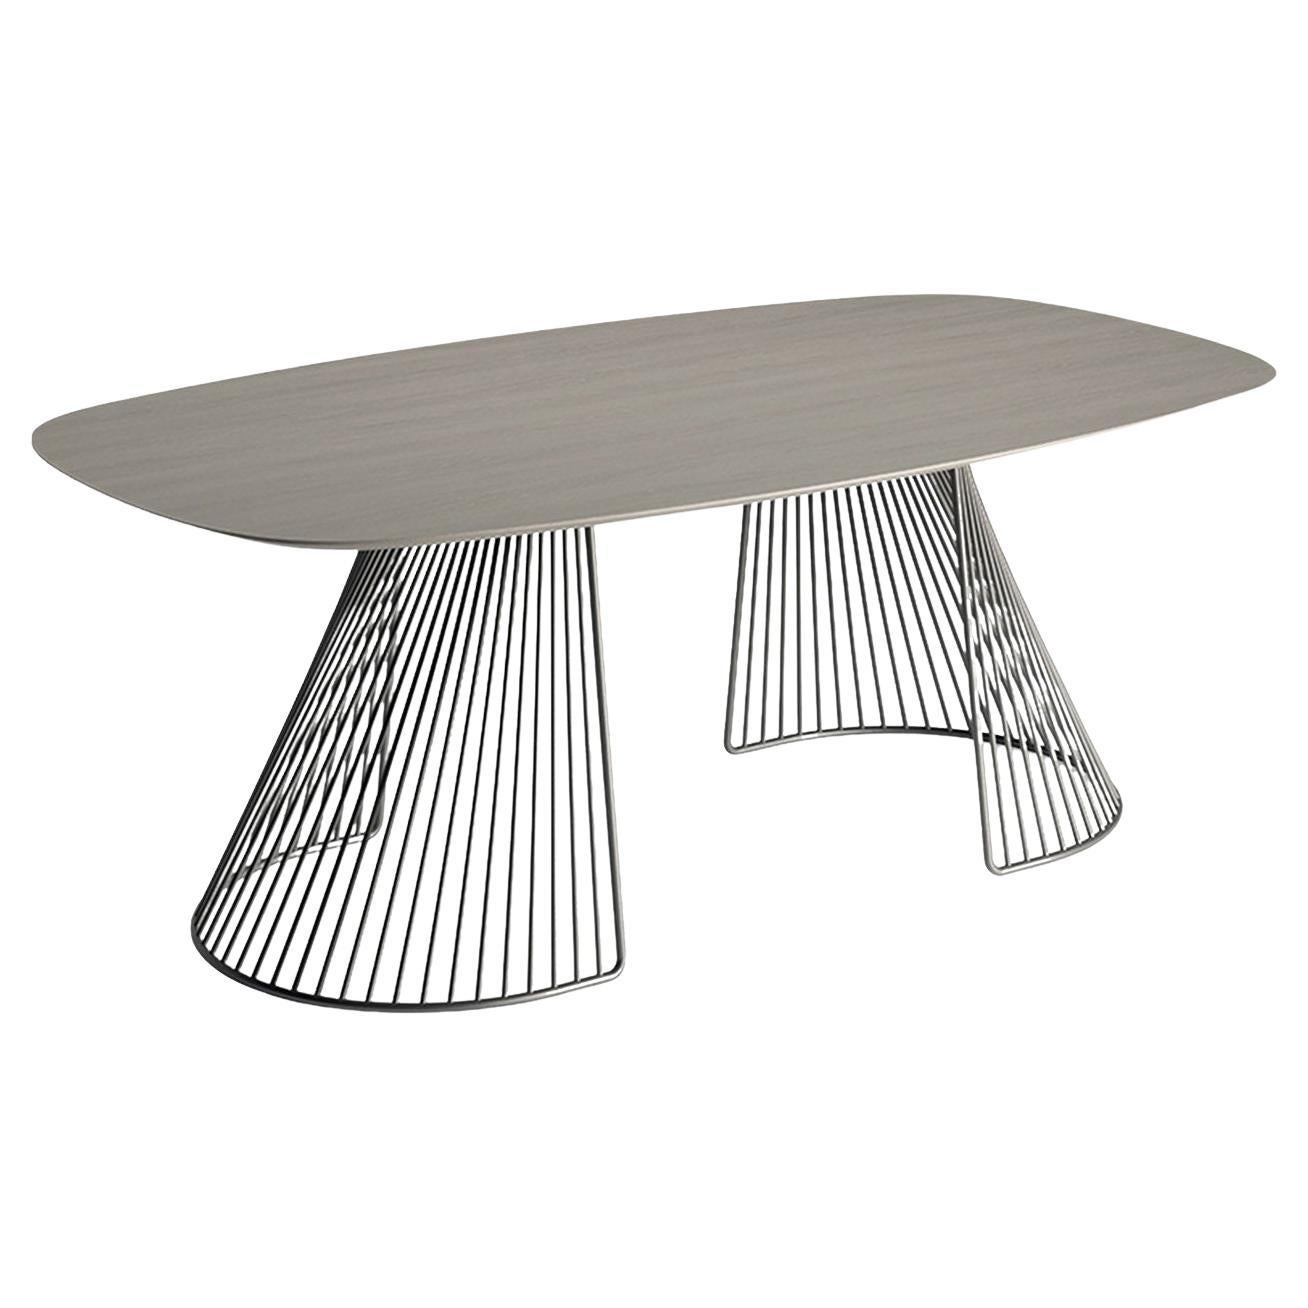 Grid Canadian Durmast Rectangular Table by Ciani Design